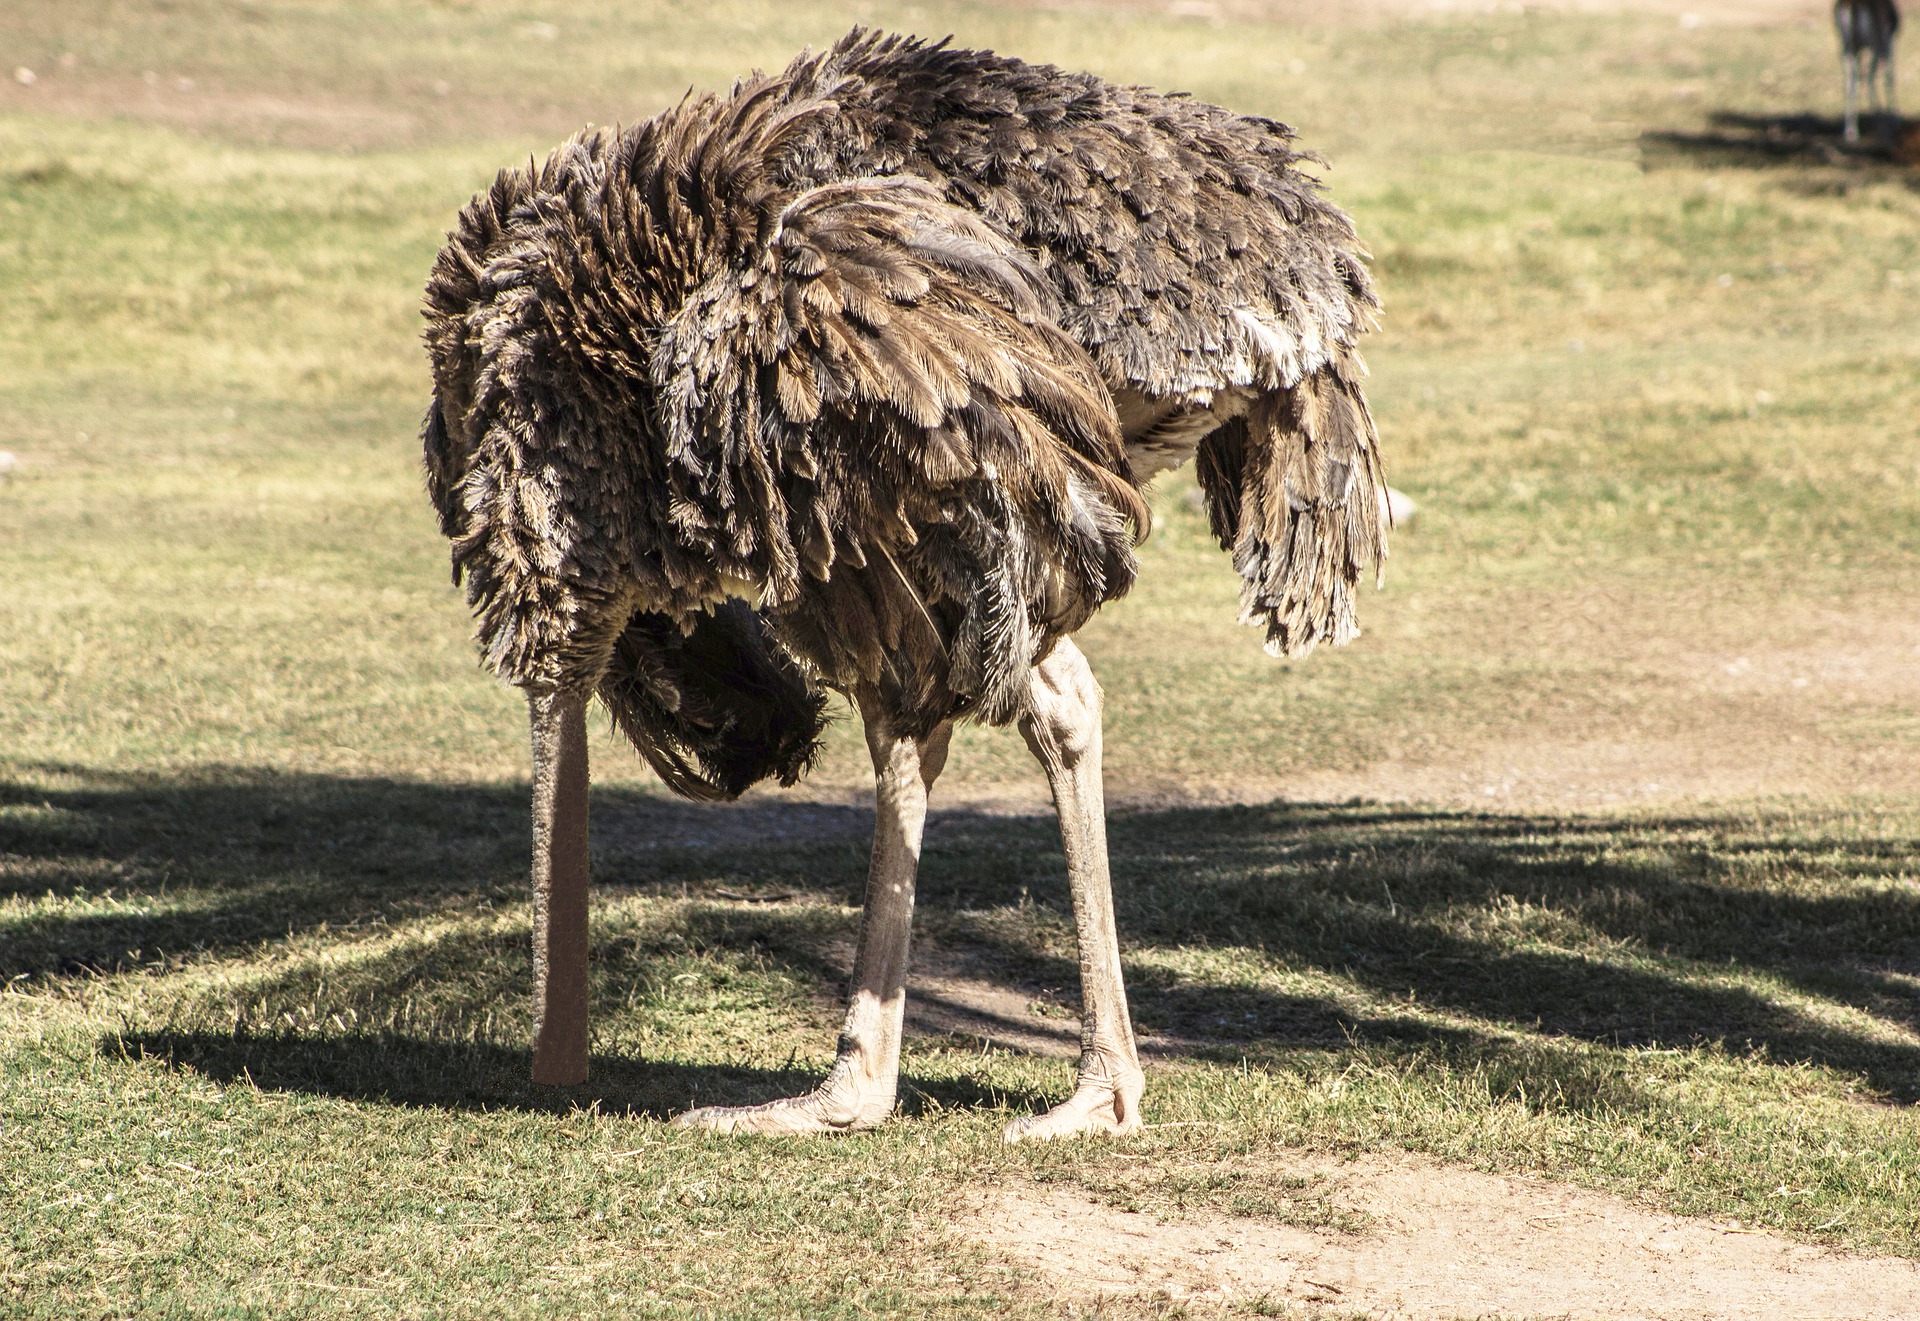 A picture of an ostrich with its head in the sand, representing the phrase "To stick/bury your head in the sand."